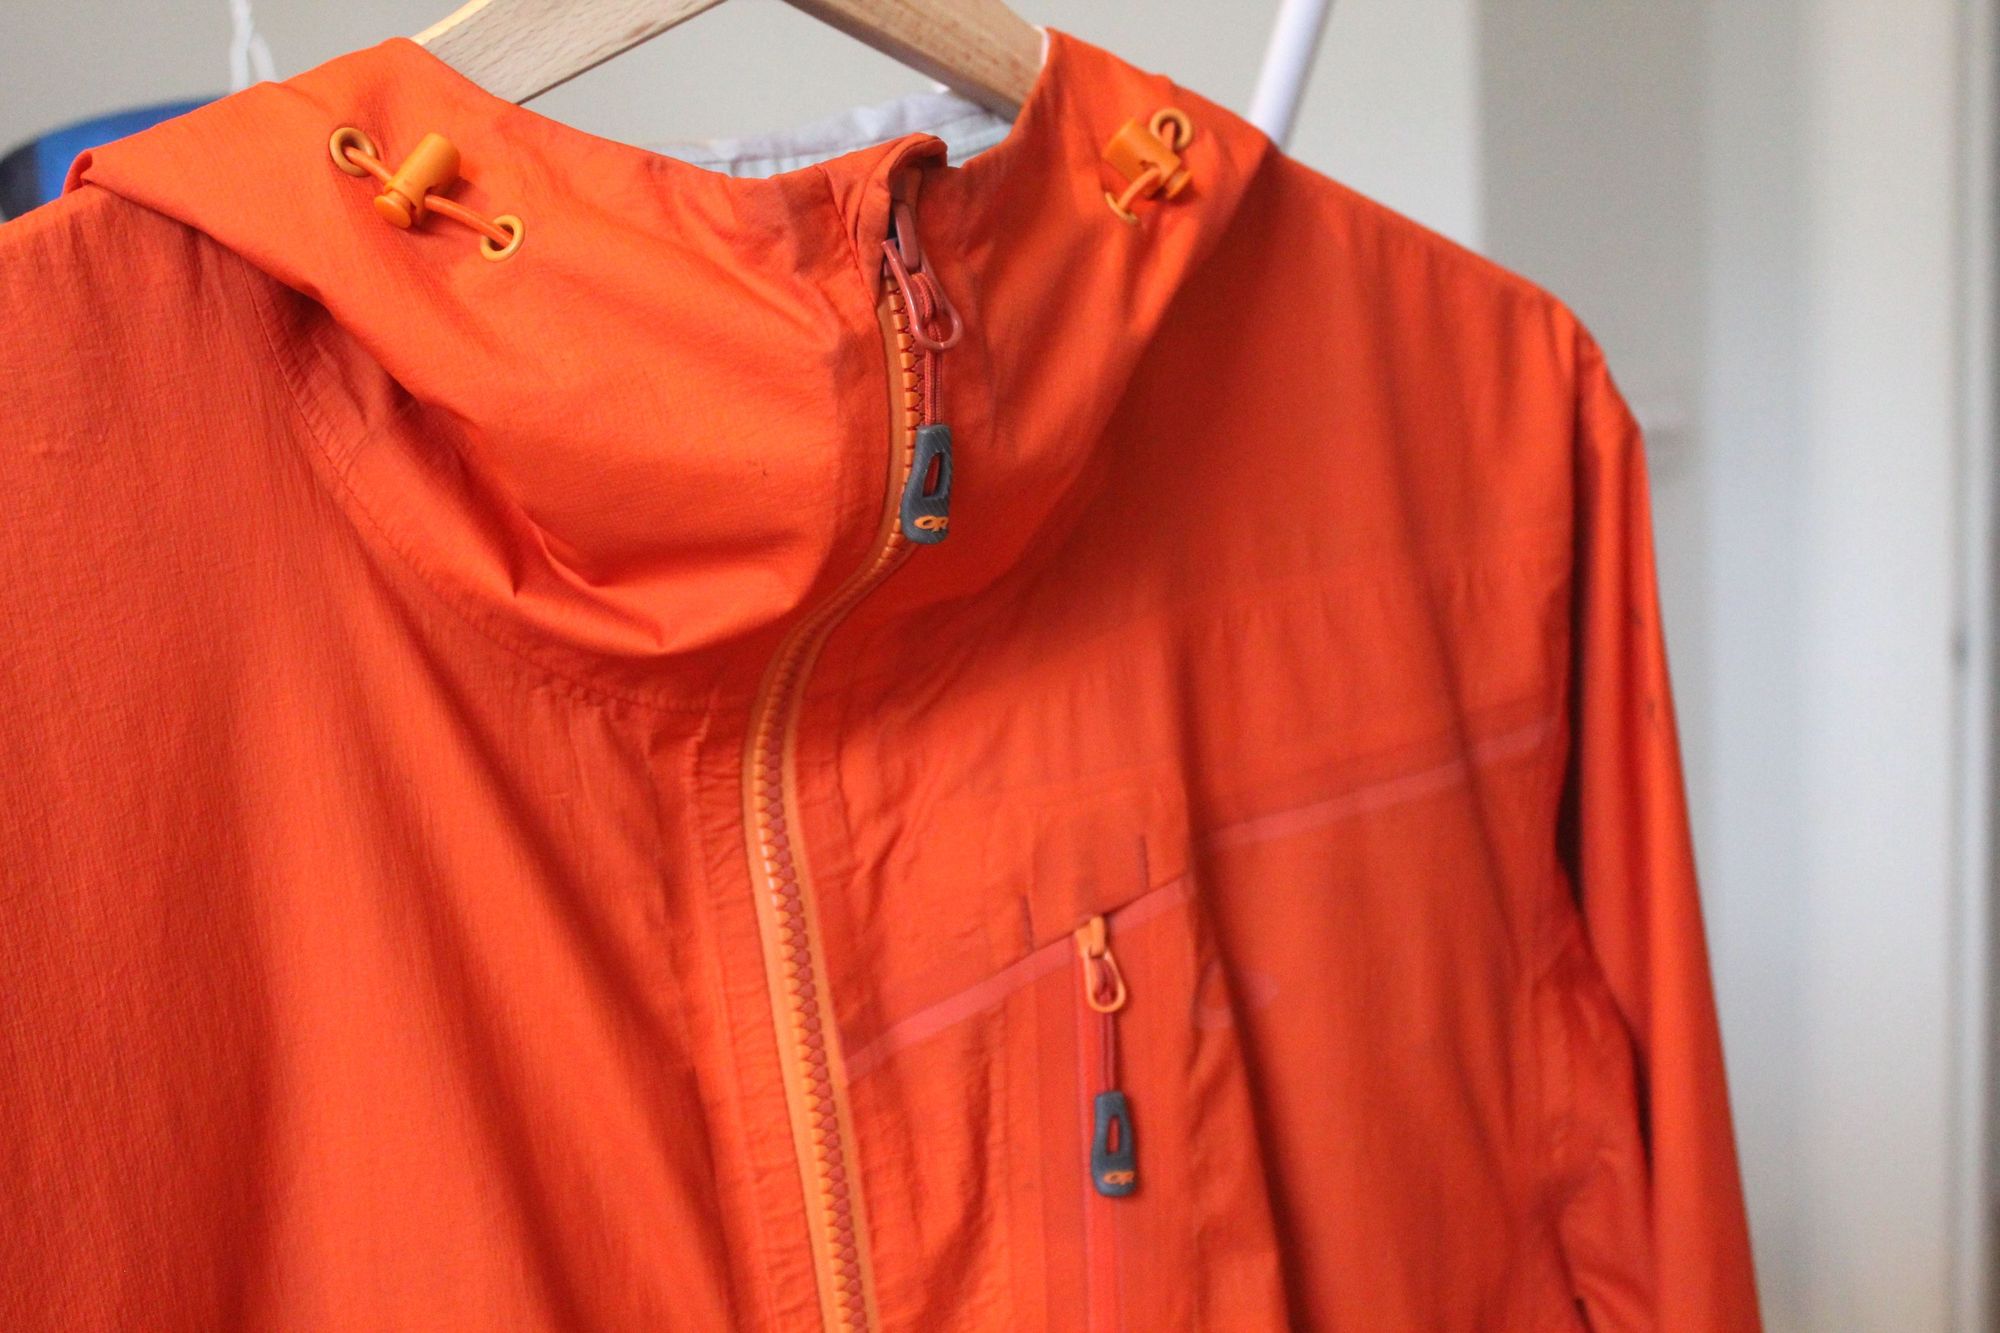 A waterproof jacket hung up to dry. Photo: Stuart Kenny